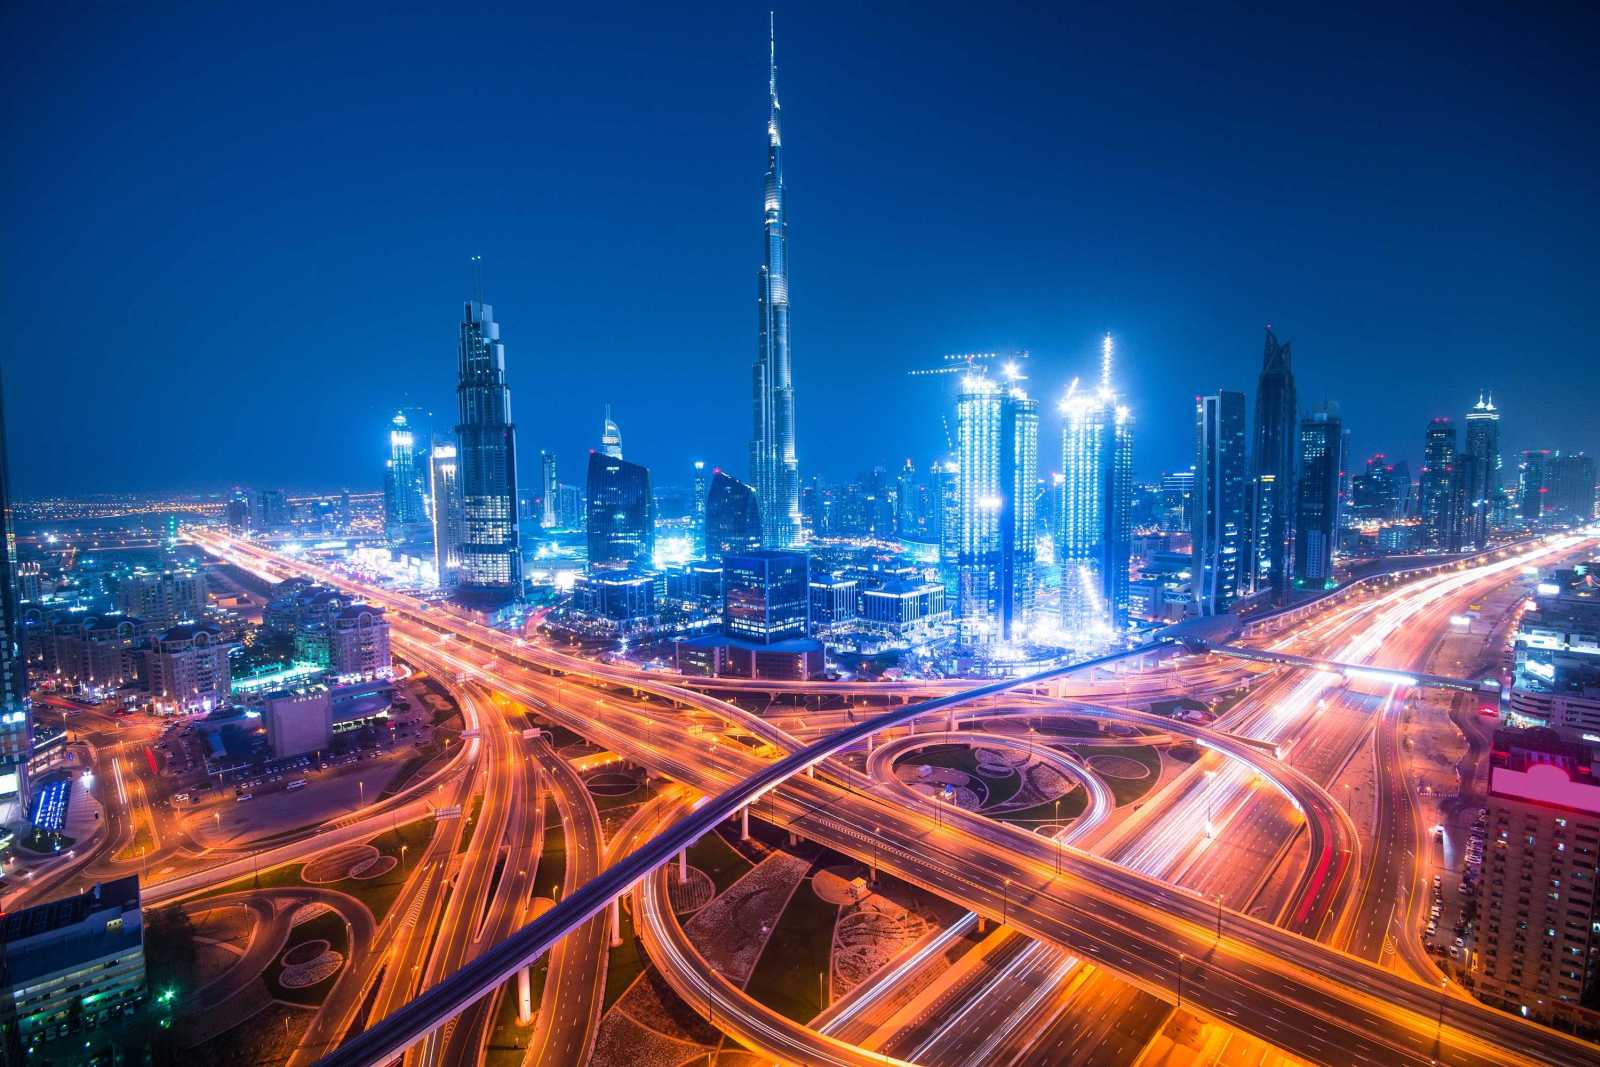 Dubai skyline at night with big highway junction in foreground